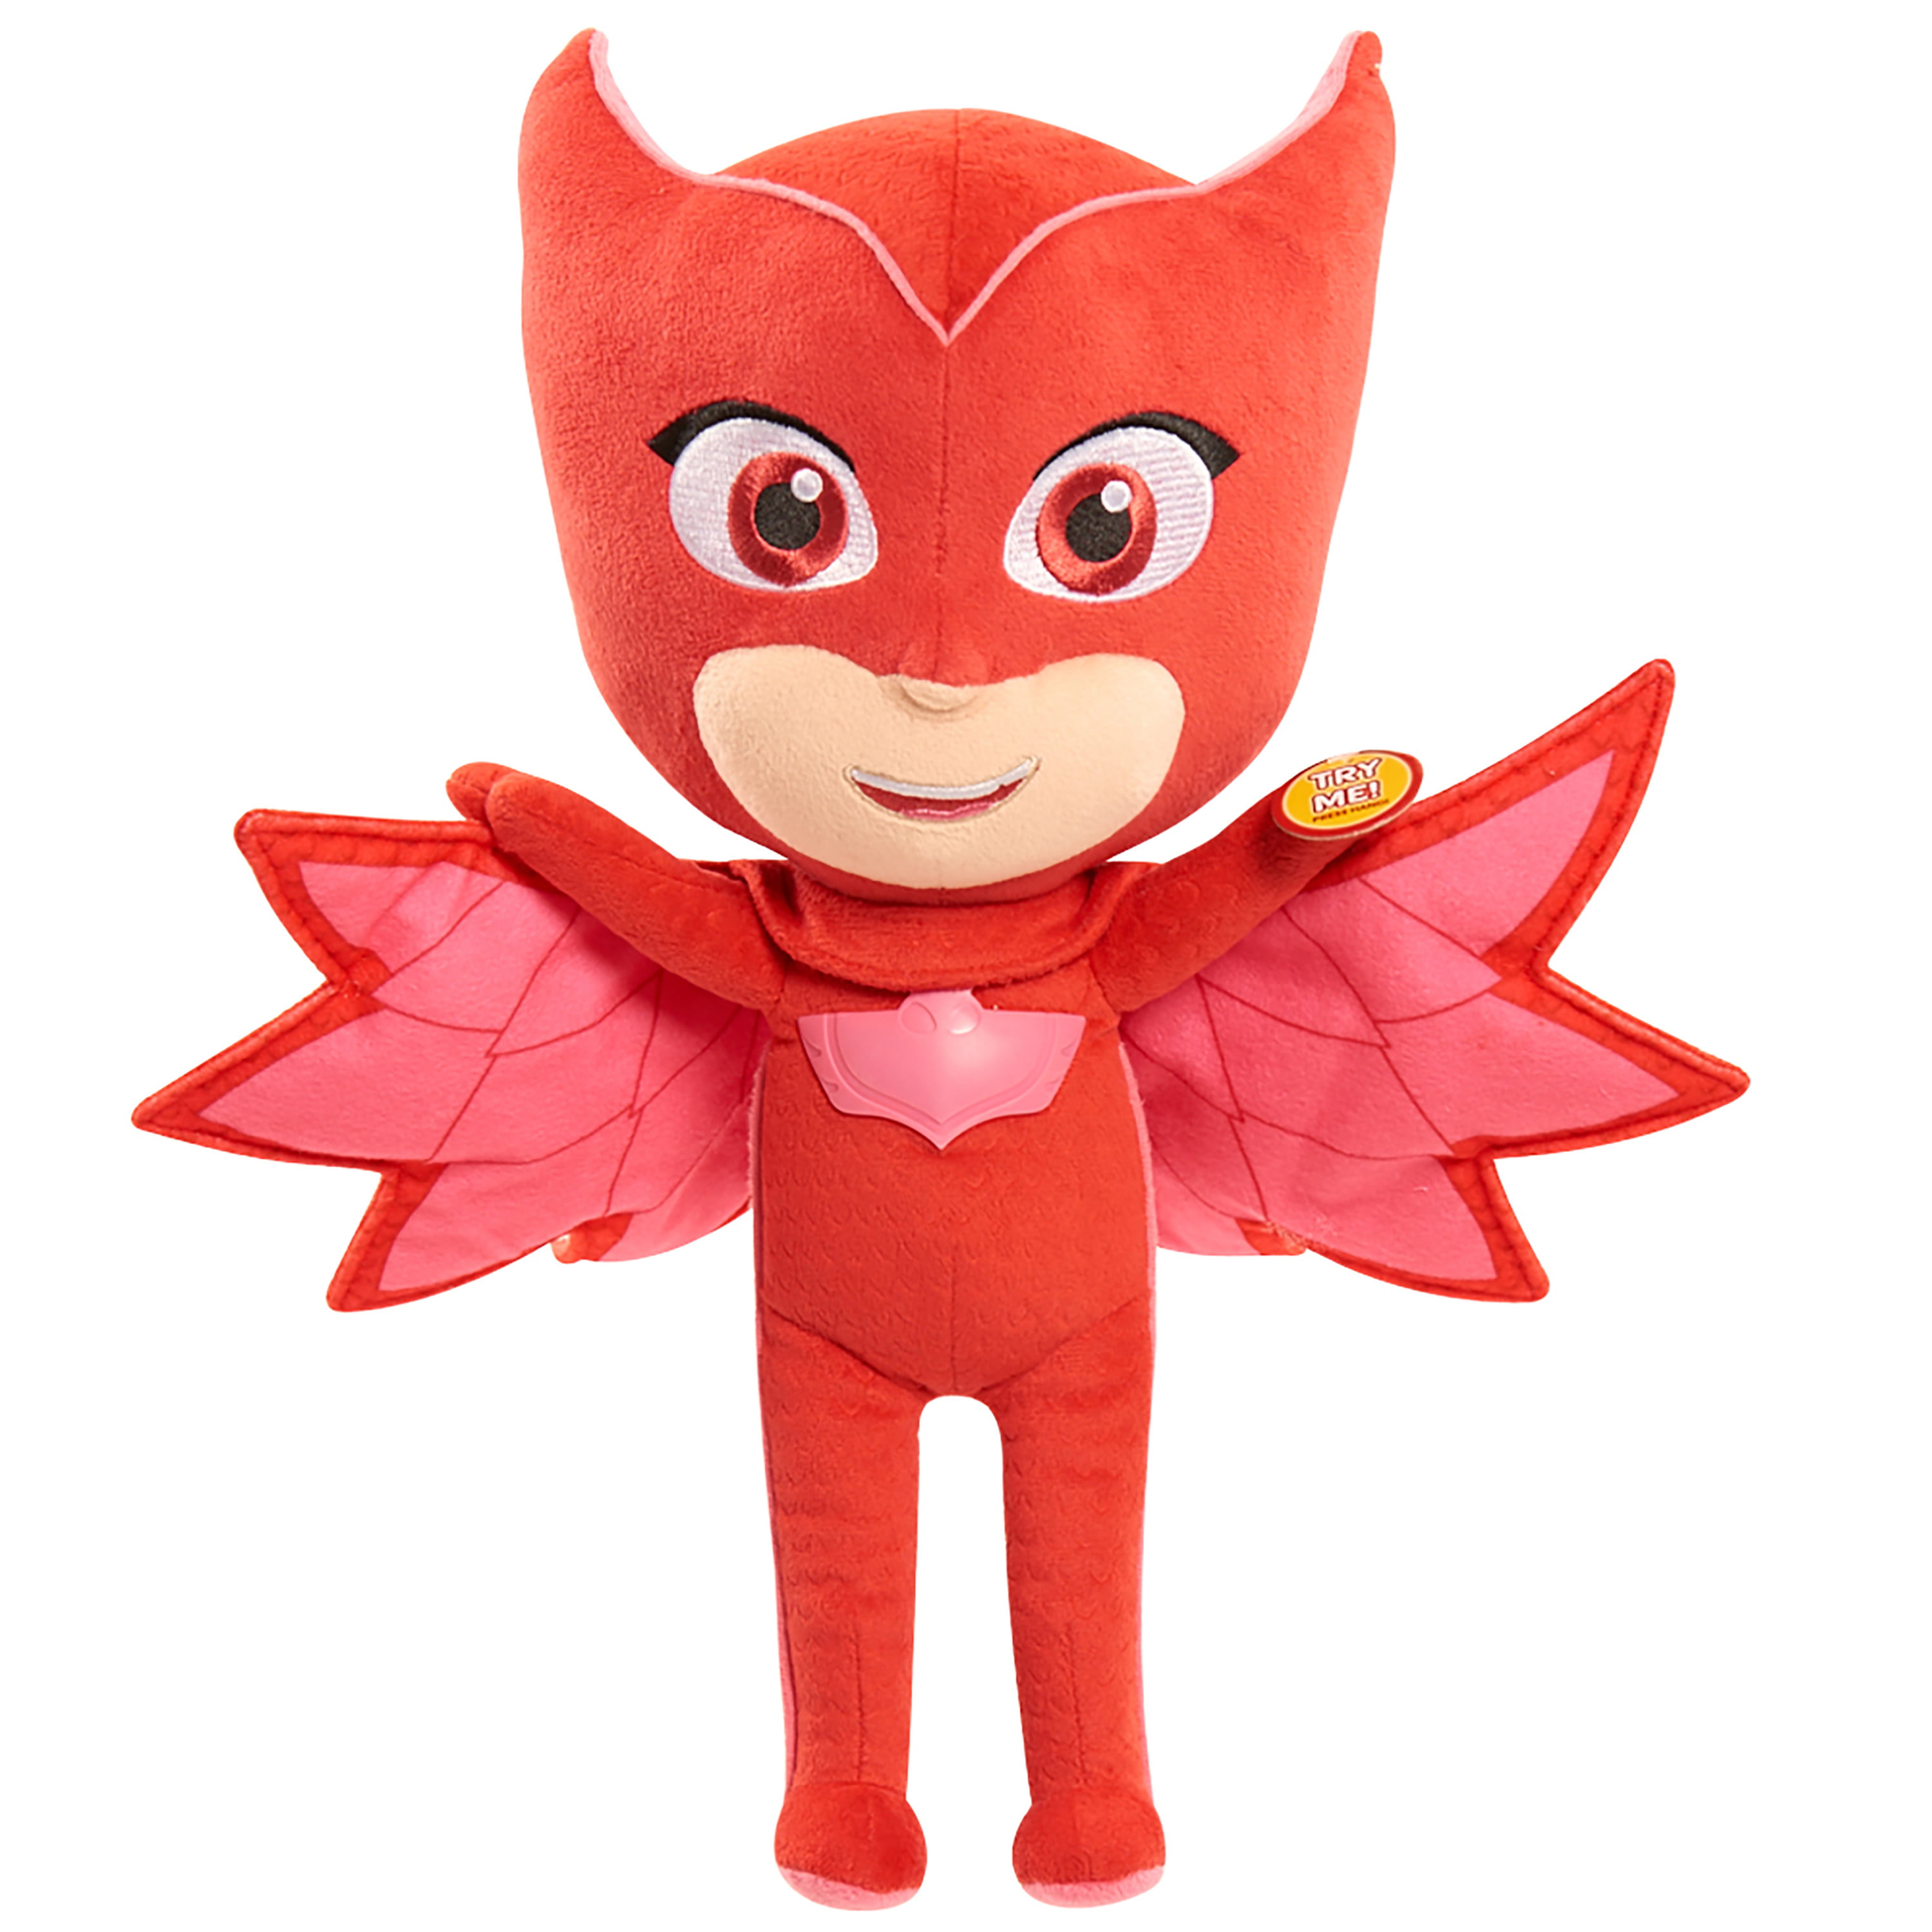 owlette soft toy